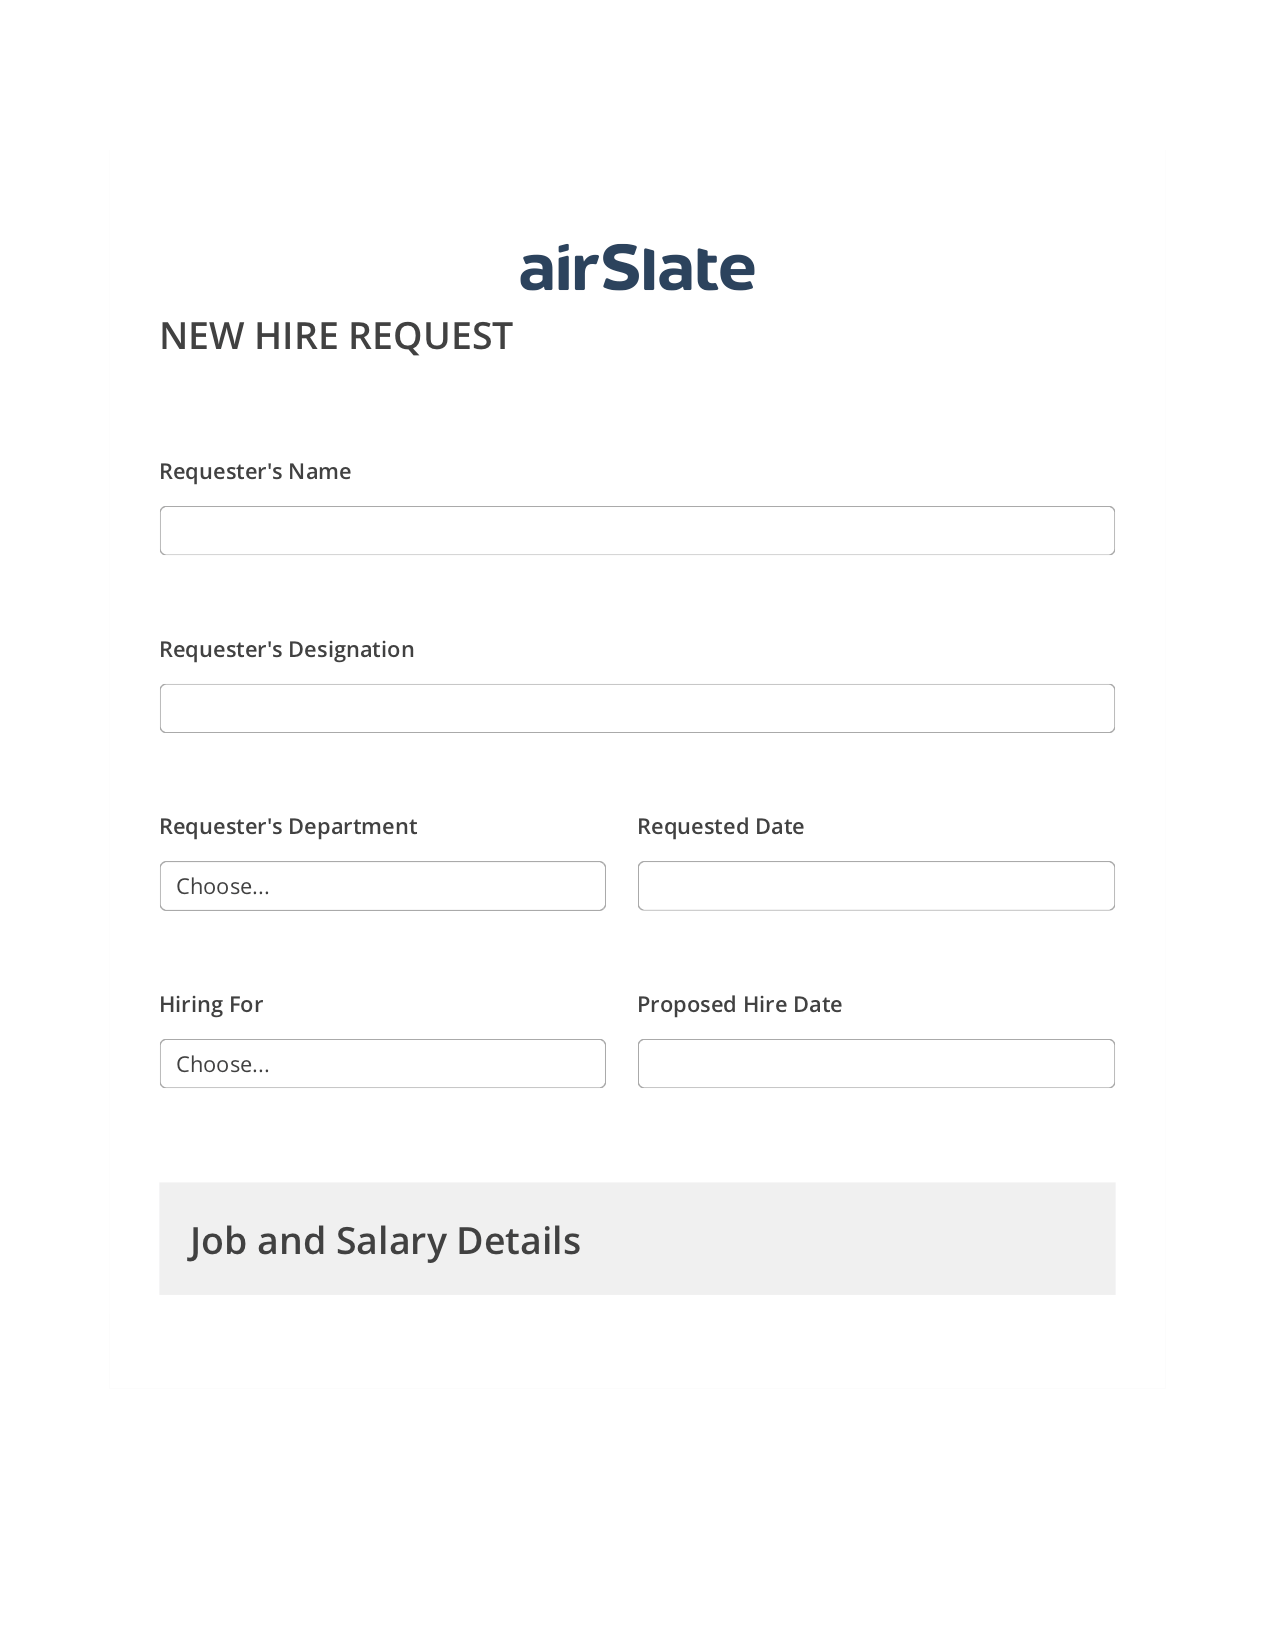 Hiring Request Workflow Pre-fill from MS Dynamics 365 Records, Jira Bot, Post-finish Document Bot